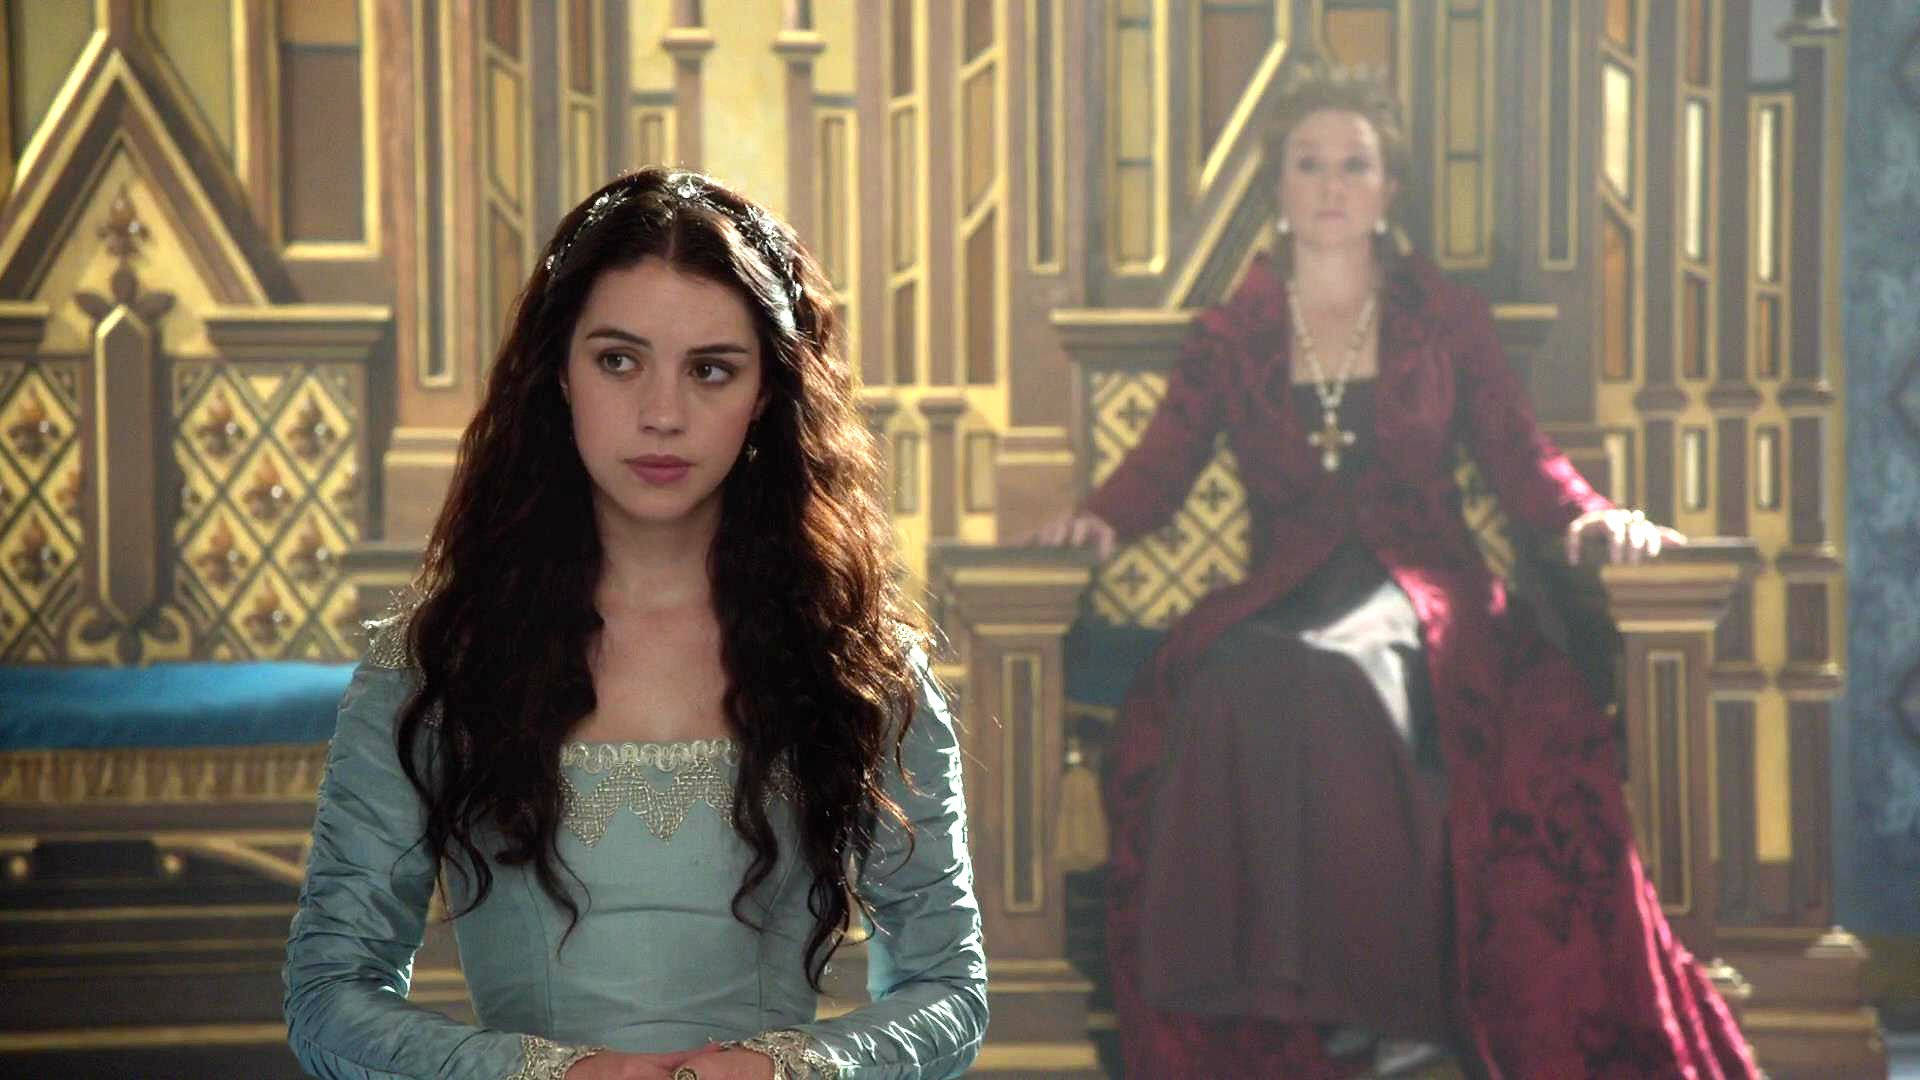 Royal Rivalries - Mary Stuart and Queen Catherine in The Drama Series "Reign" Wallpaper